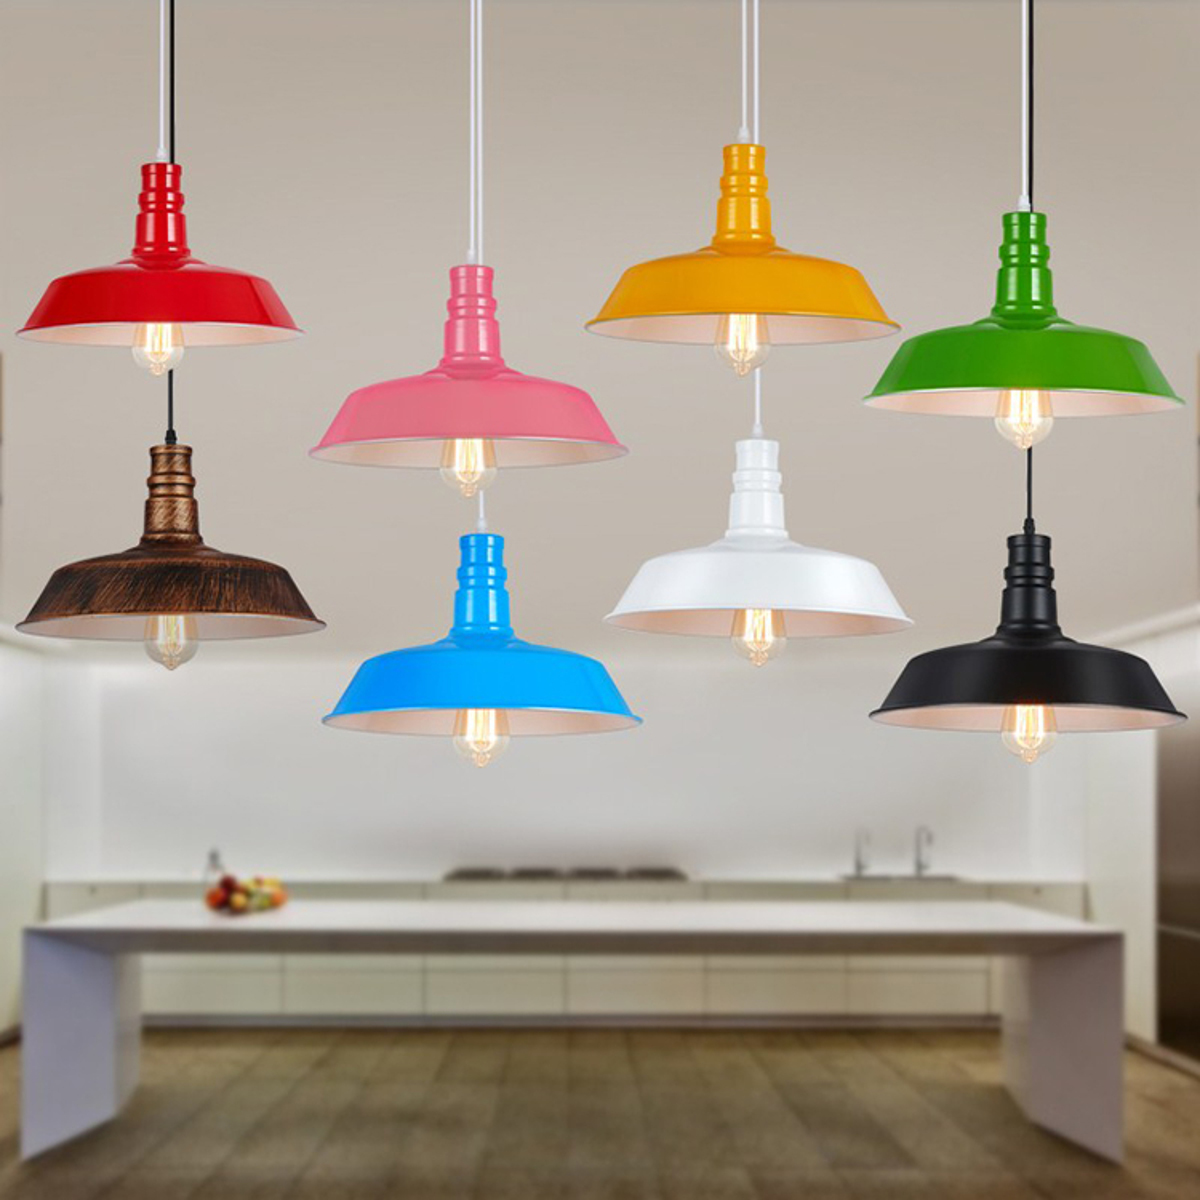 Modern-Industrial-Metal-Style-Ceiling-Pendant-Light-Lamp-Shades-Lampshade-Decor-1349402-1